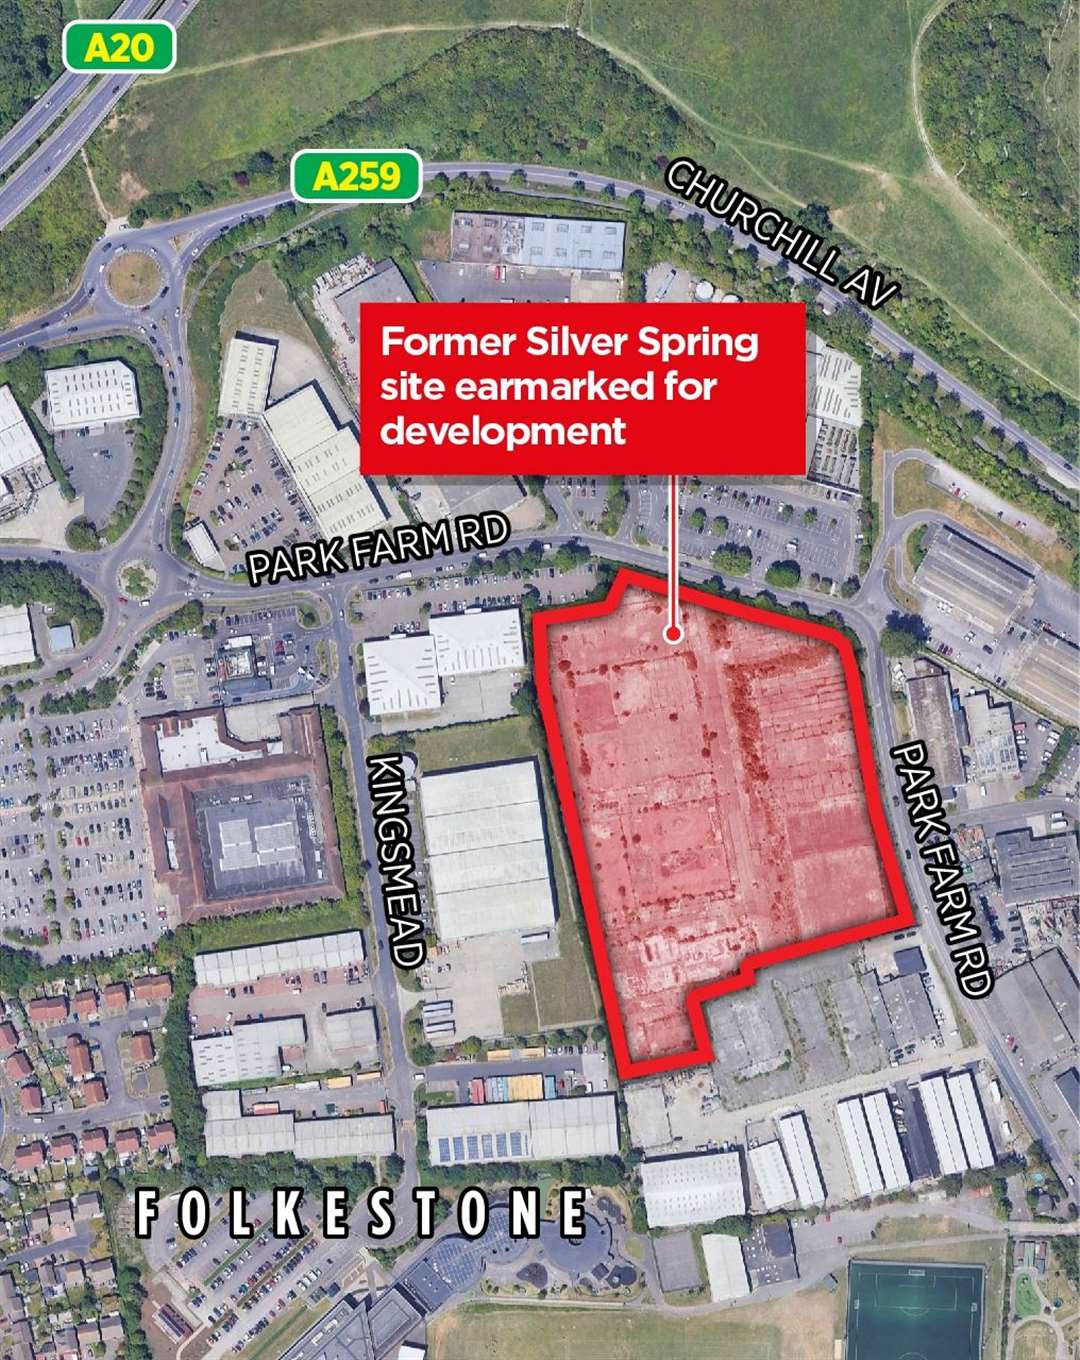 The former Silver Spring site sits on Park Farm Industrial Estate in Folkestone